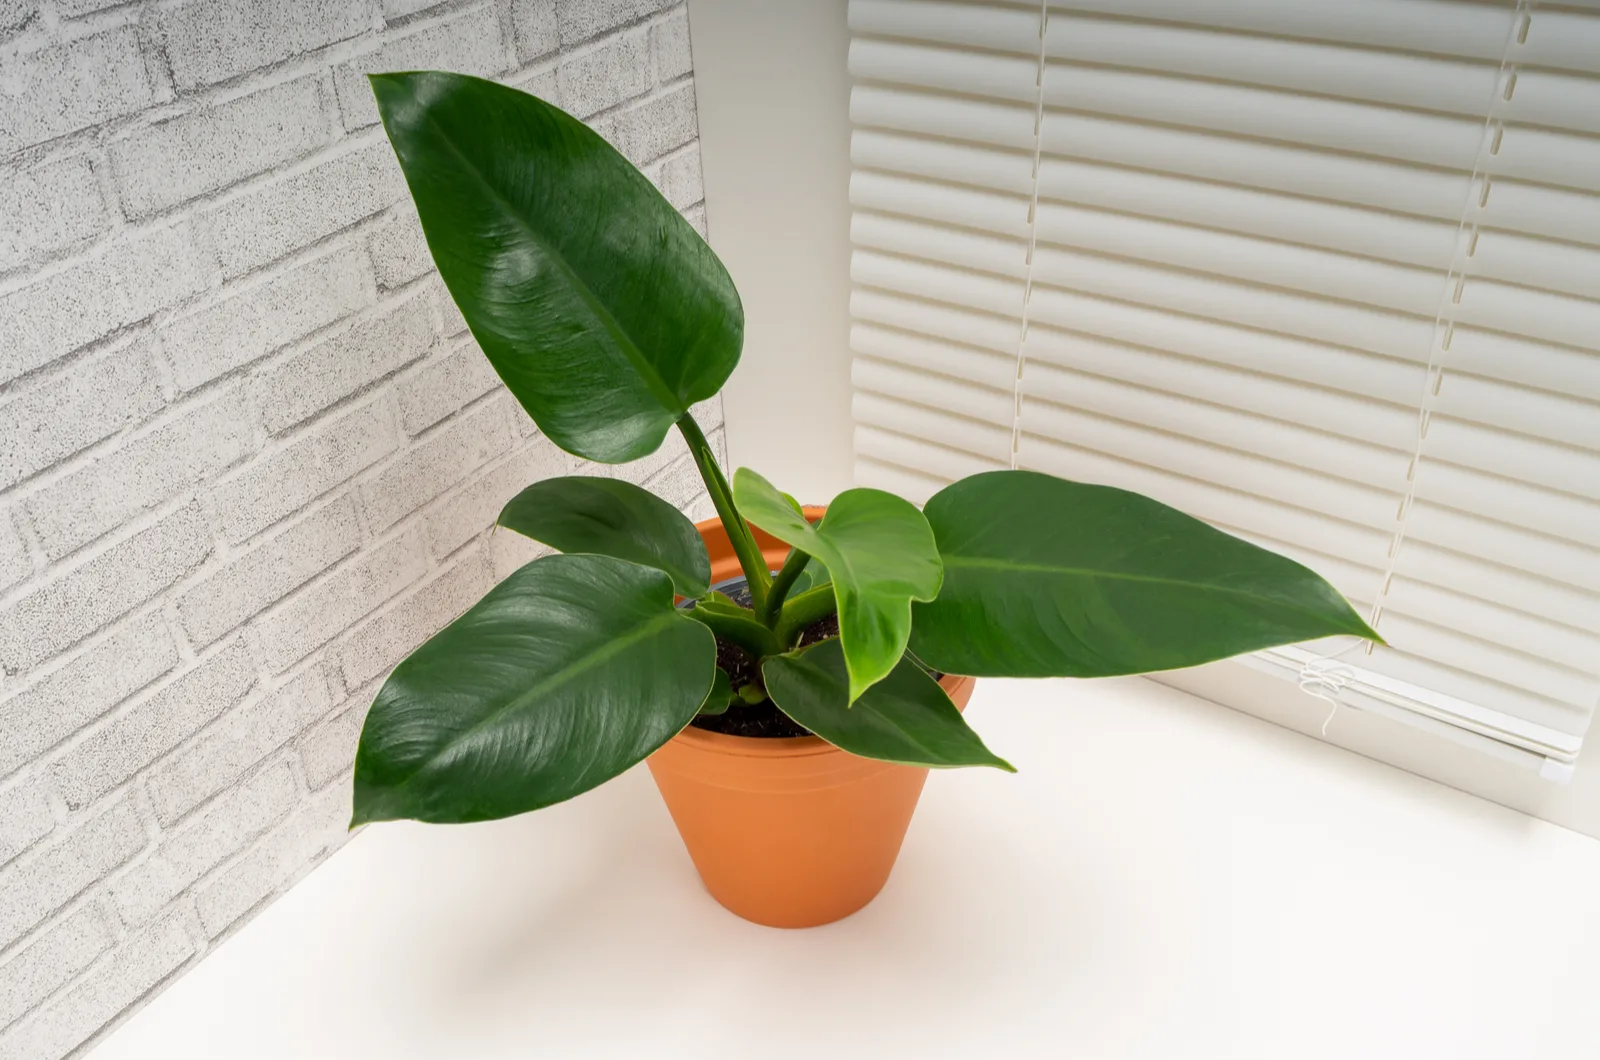 Imperial Green Philodendron on table